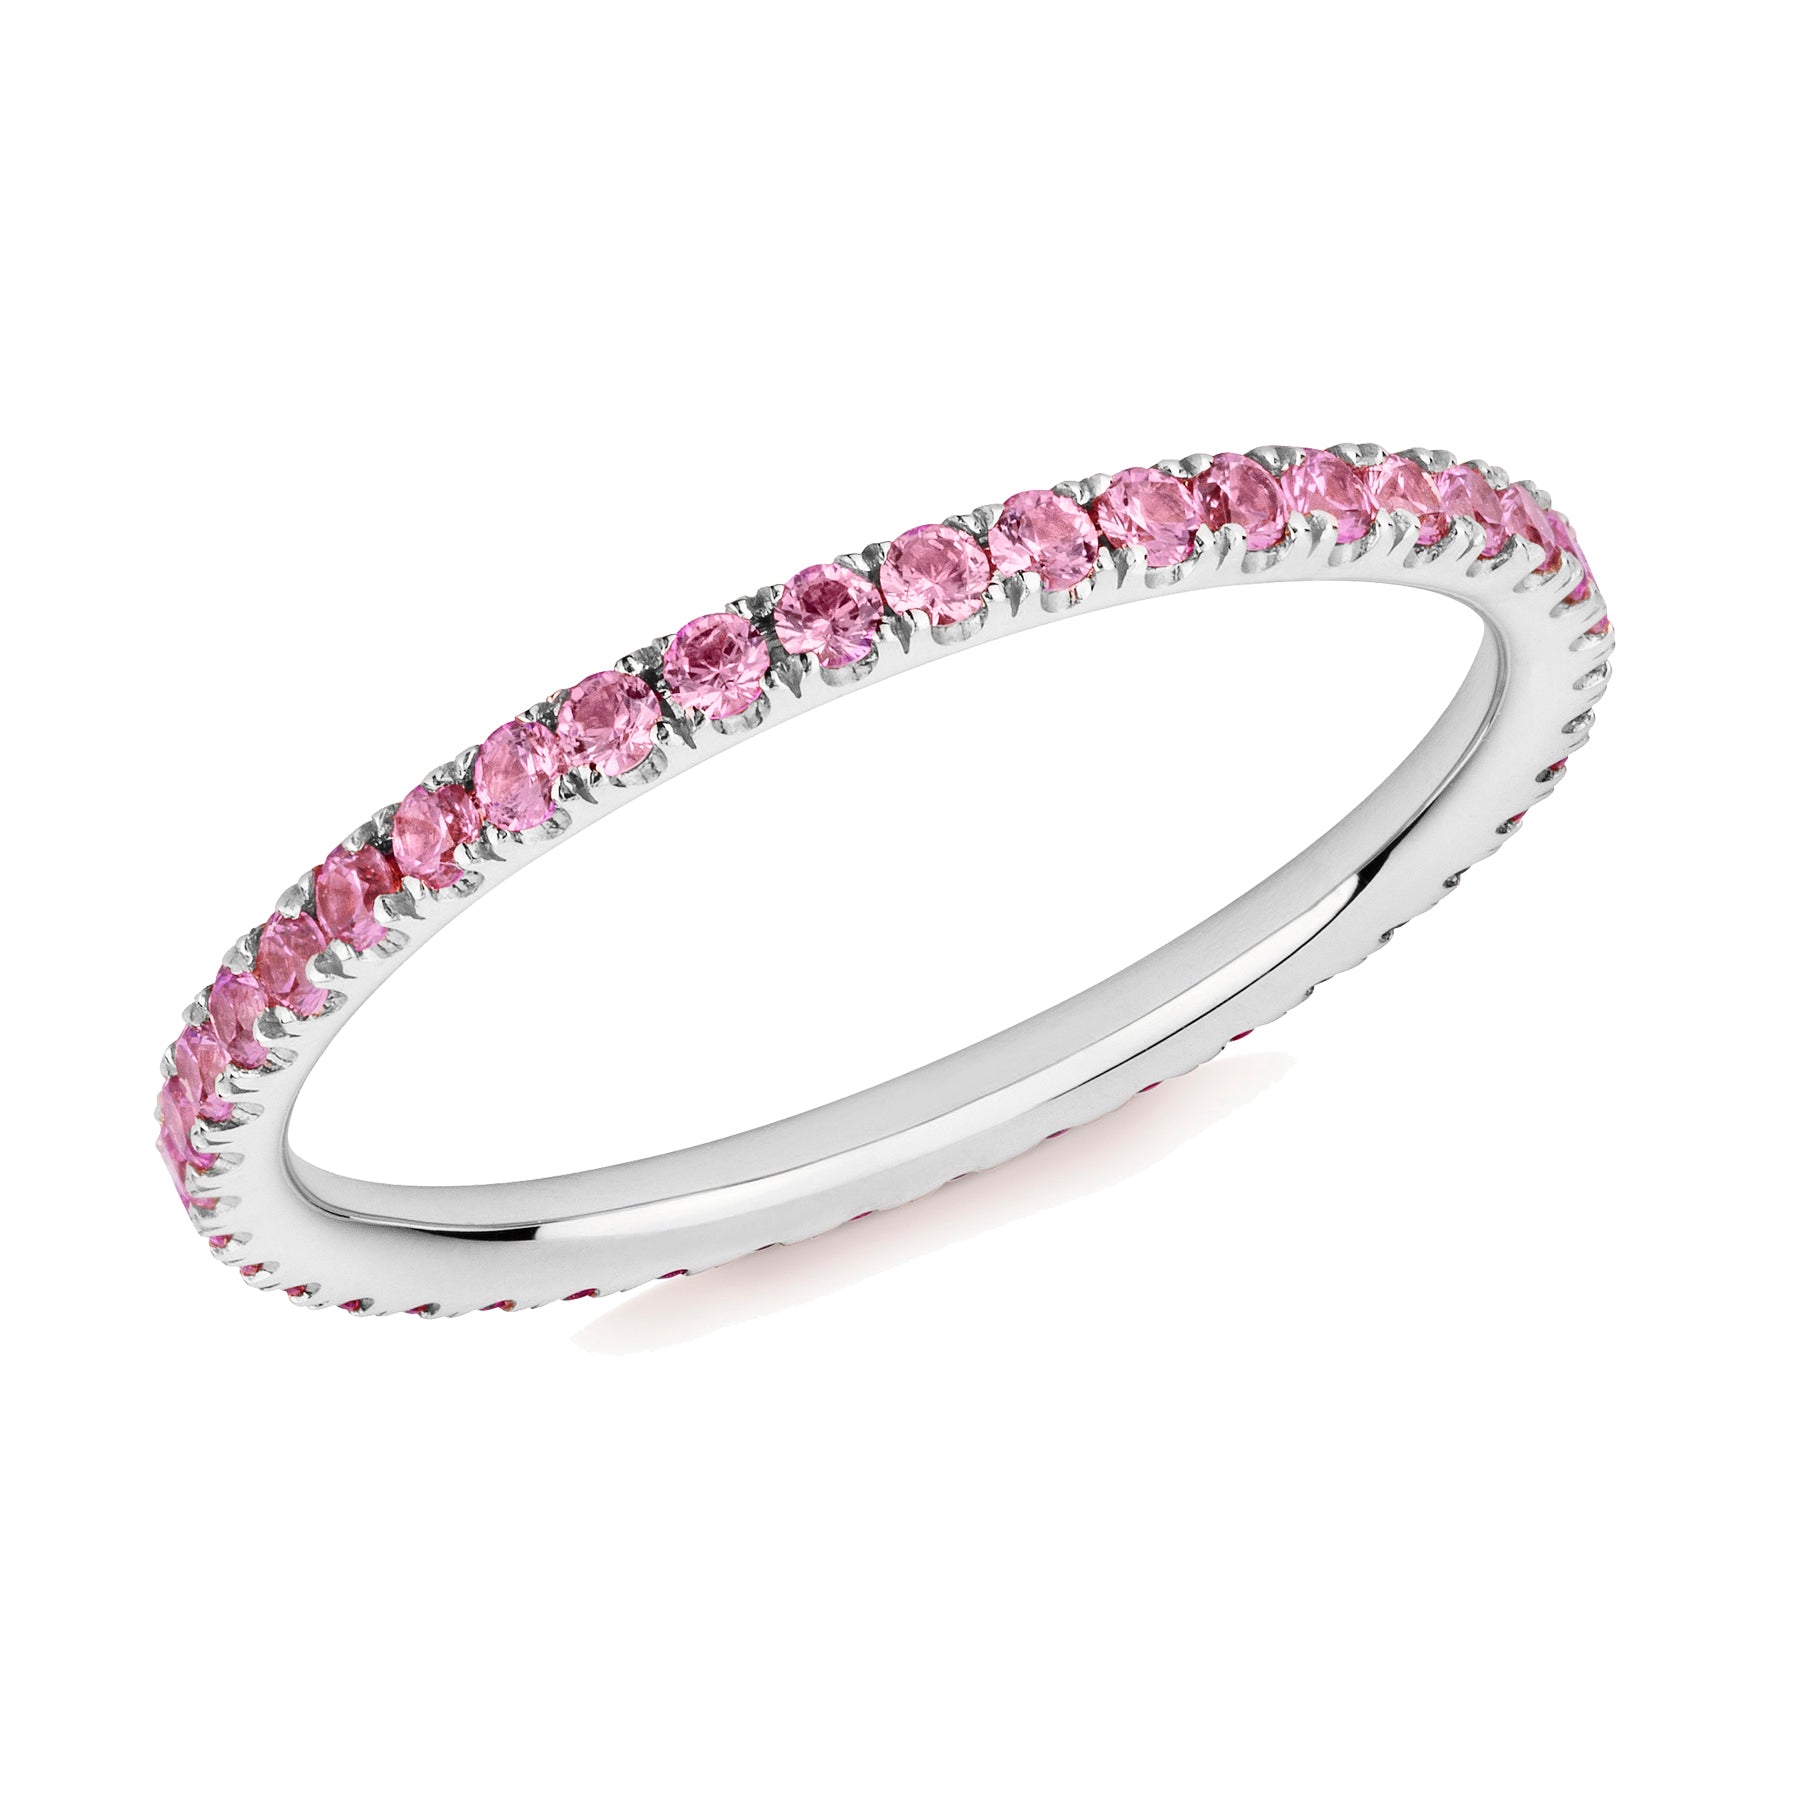 Pink sapphire eternity ring in platinum on a white background.